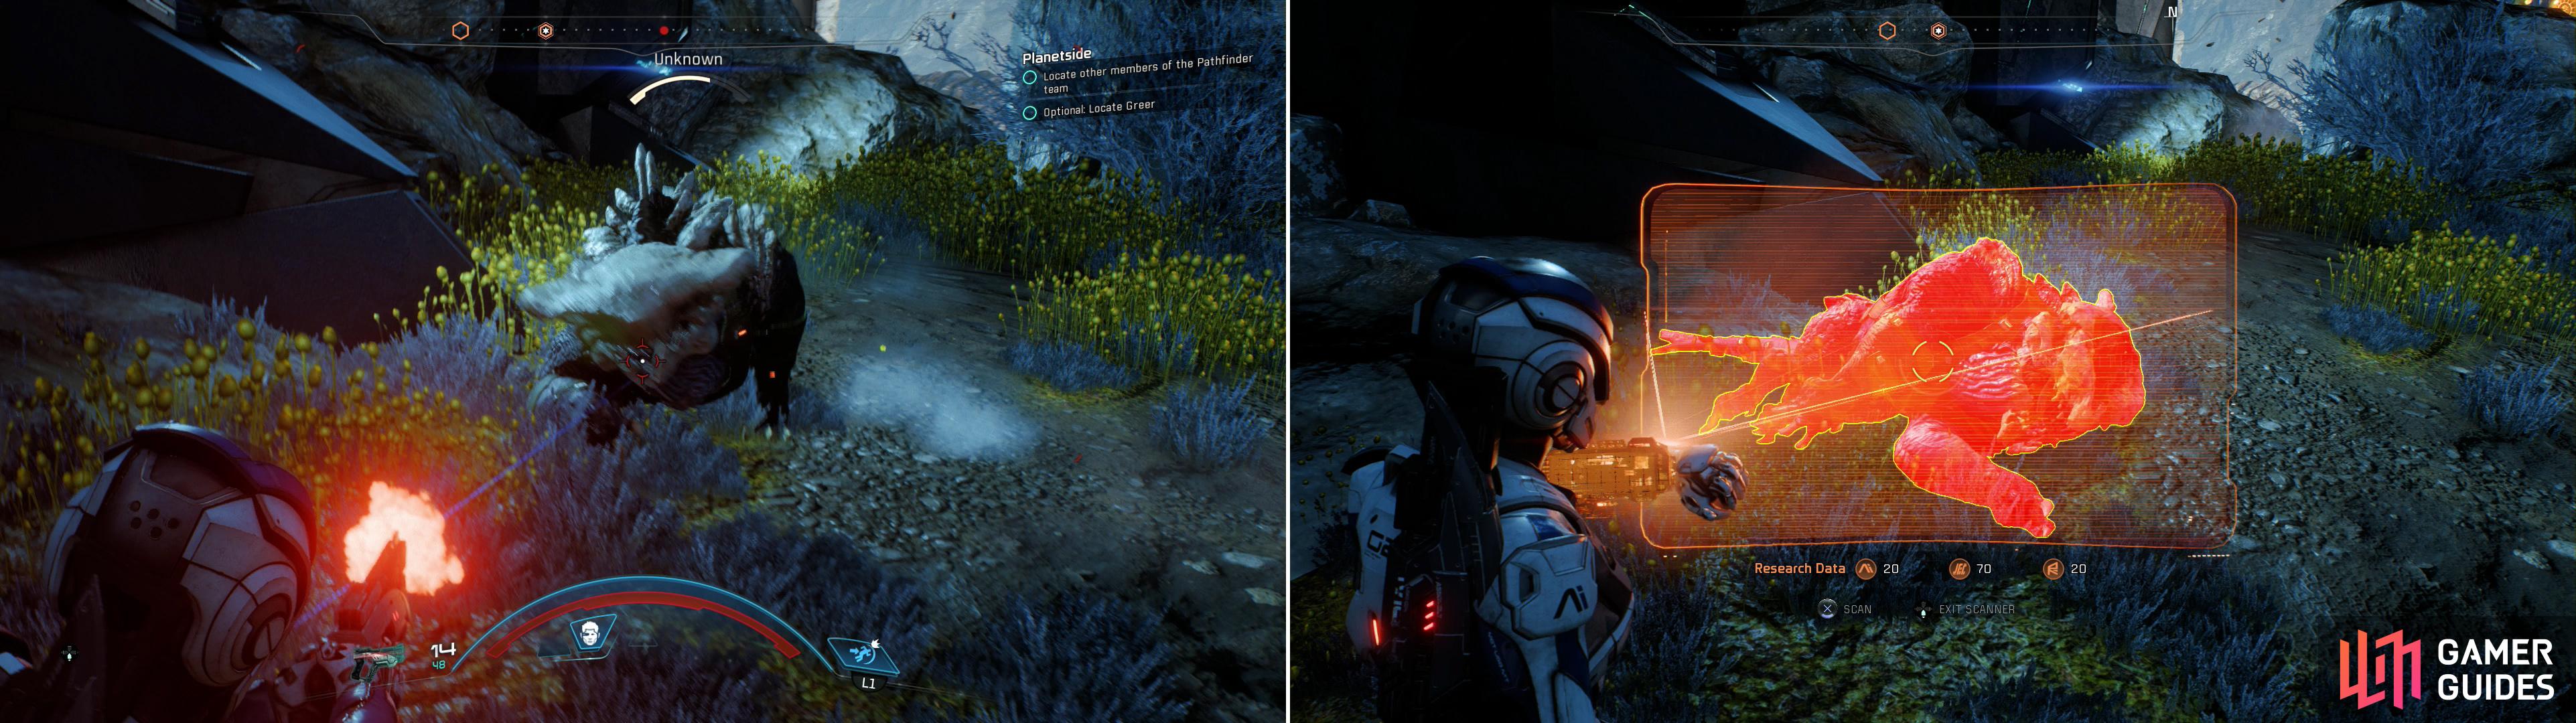 Be wary of a cloaked quadruped (left) which will attempt to ambush you. After it’s dead, be sure to scan it (right) for a great deal of Heleus Research Data.